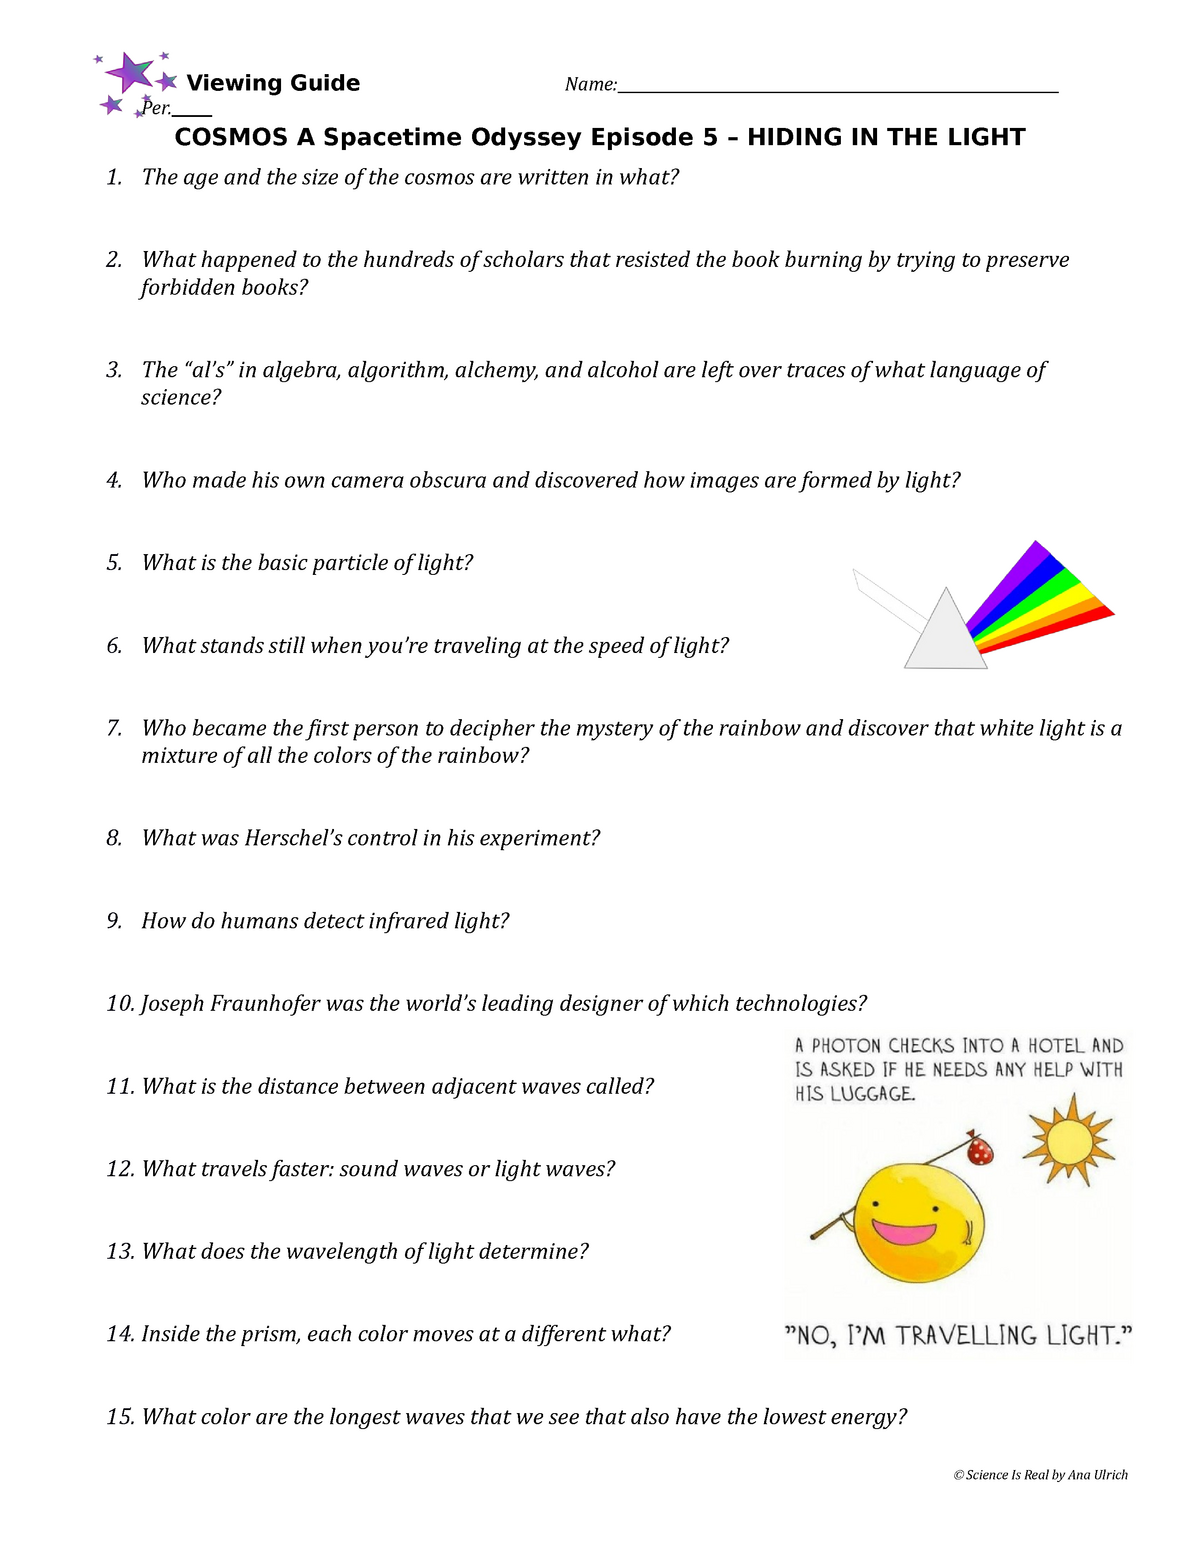 Student Handout Cosmos Episode 20 - Hiding In The Light-20 - AERO With Cosmos Episode 1 Worksheet Answers